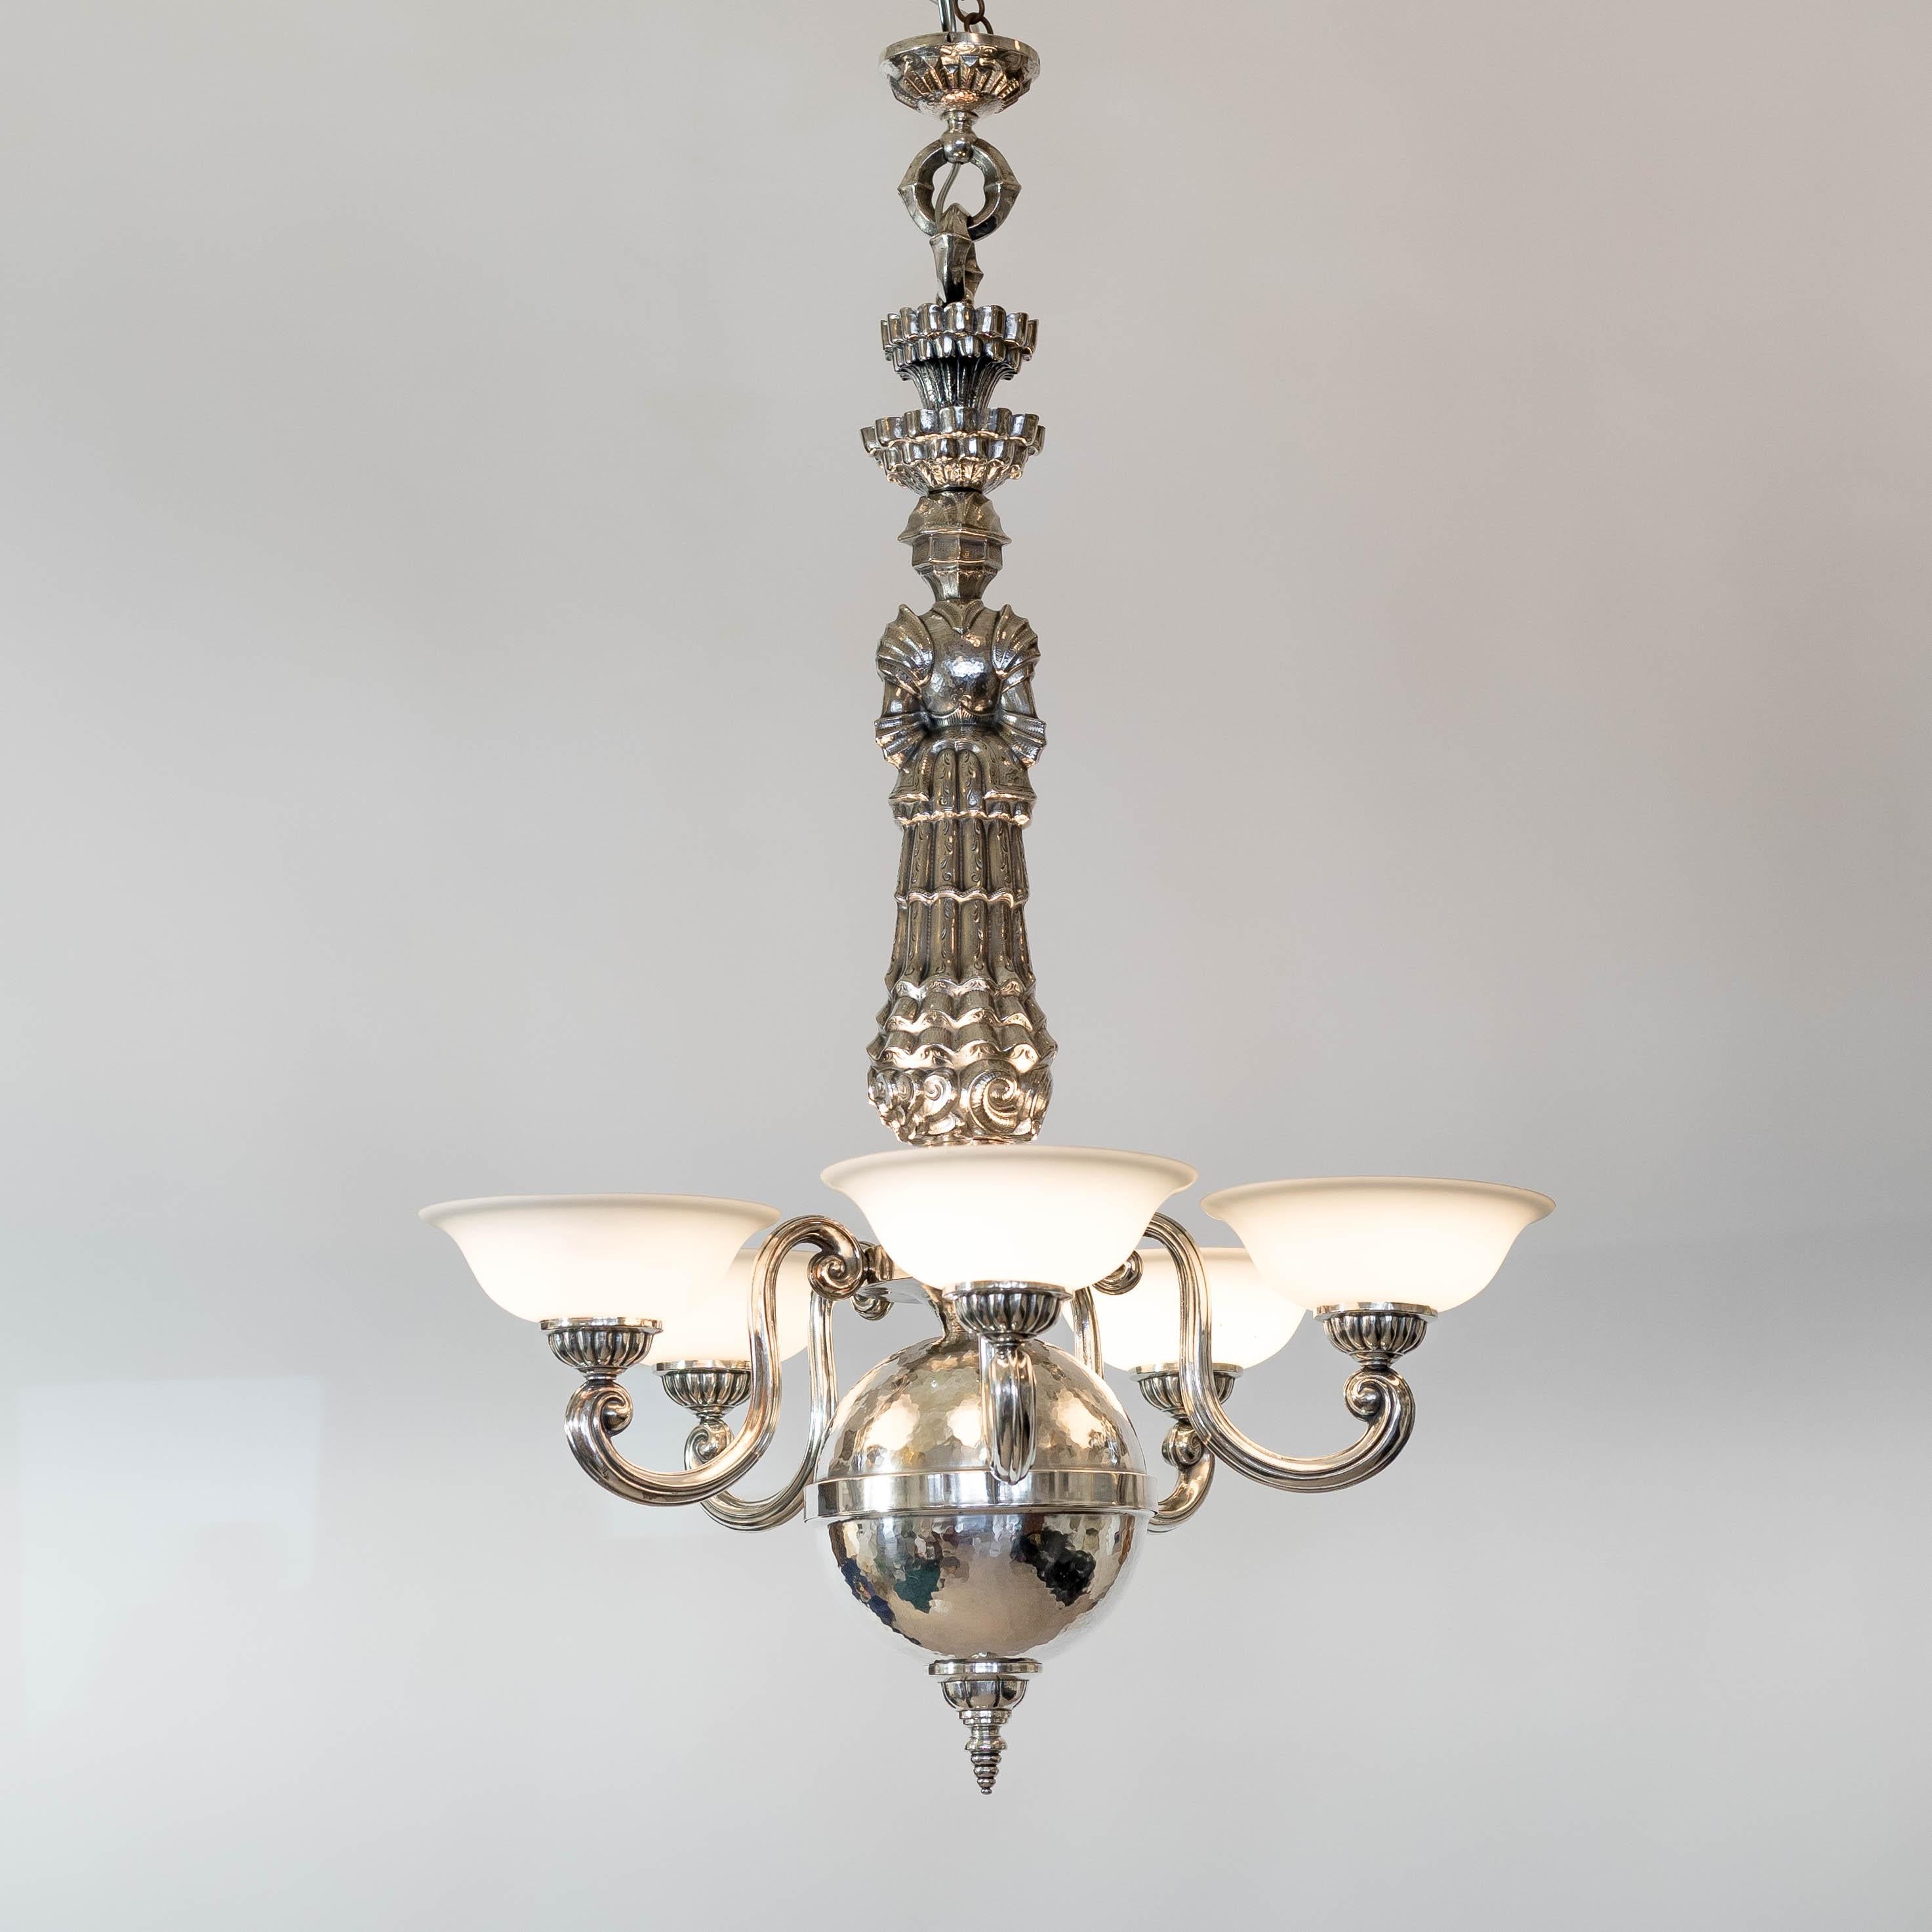 Swedish Grace Atelier Torndahl pendant in white metal with white glass shades 1920s by Per Torndahl. Motif of Saint George and the Dragon.
Very good condition with few signs of wear and use.
Dimensions: Height 115cm/45.3? and diameter